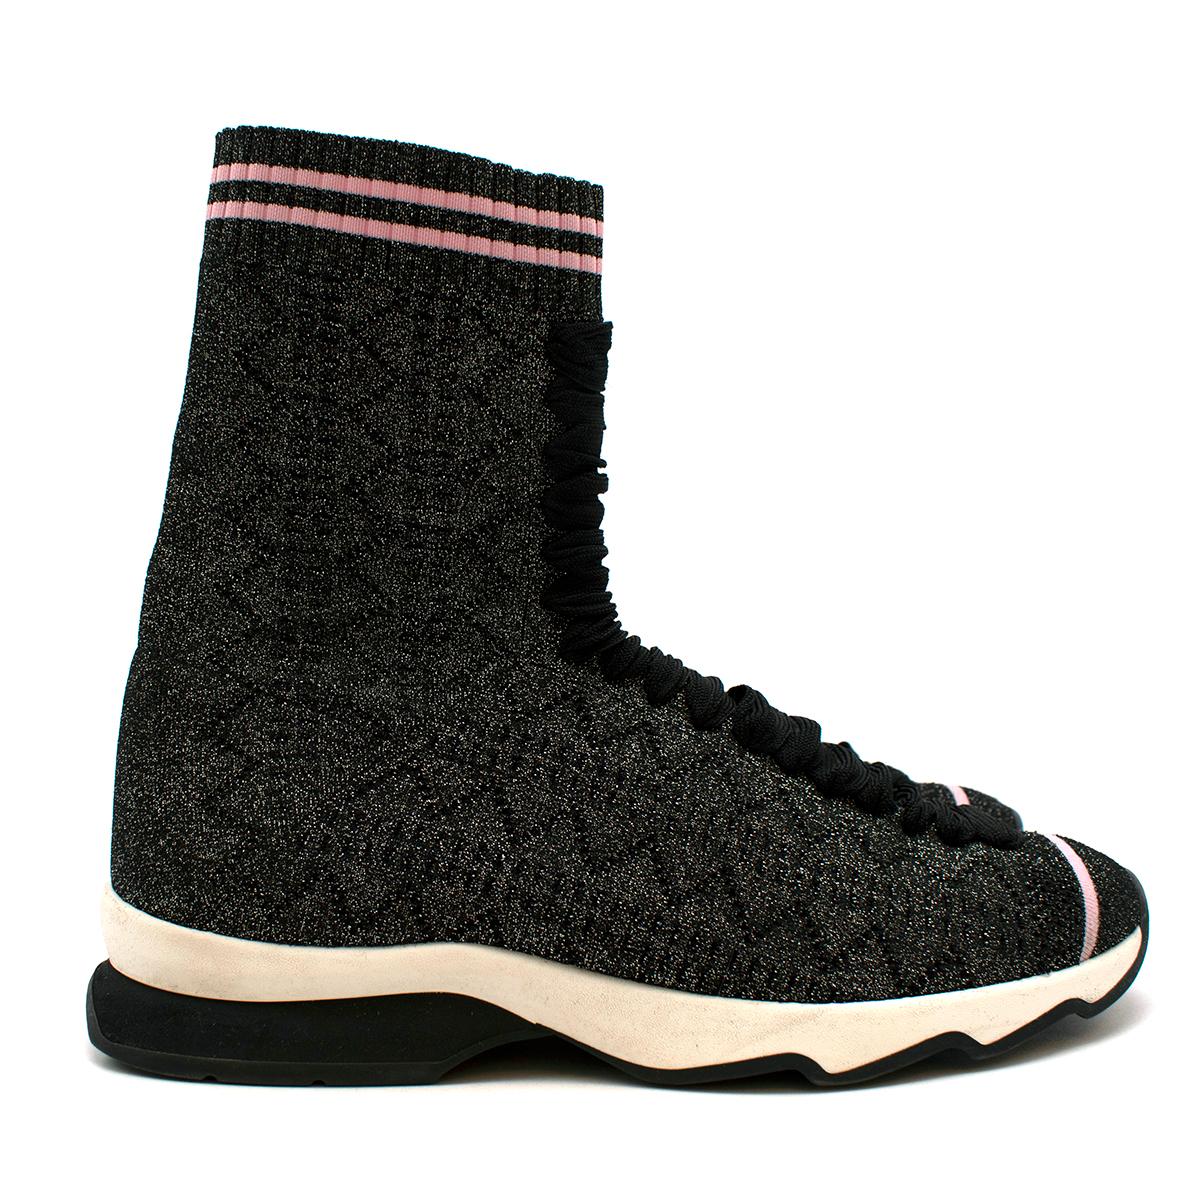 Fendi Grey Lurex Sock Trainers 

The high-top knit sneakers come with a lace-up detailing and a tonal pattern knit throughout. The metallic black iteration comes with pink detailing, contrasting against the glittery material.

Materials:
knit and